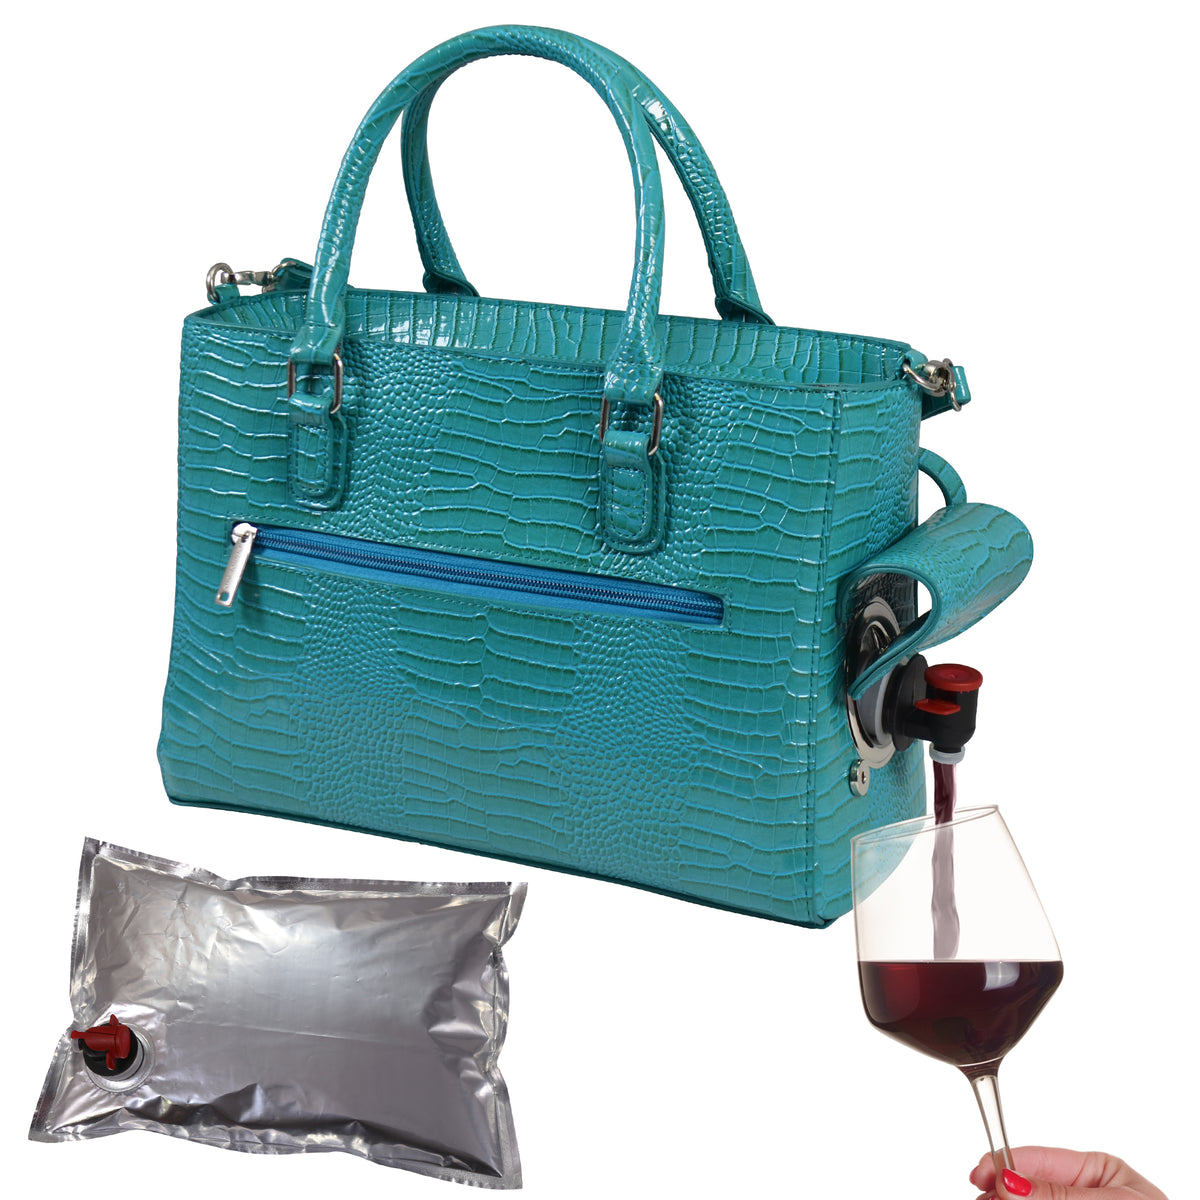 Buy Primeware Insulated Drink Purse w/ 3L Bladder Bag | Thermal Hot and  Cold Storage | Portable Drinking Dispenser for Wine, Cocktails, Beer,  Alcohol | PU Leather Finish Online at Low Prices